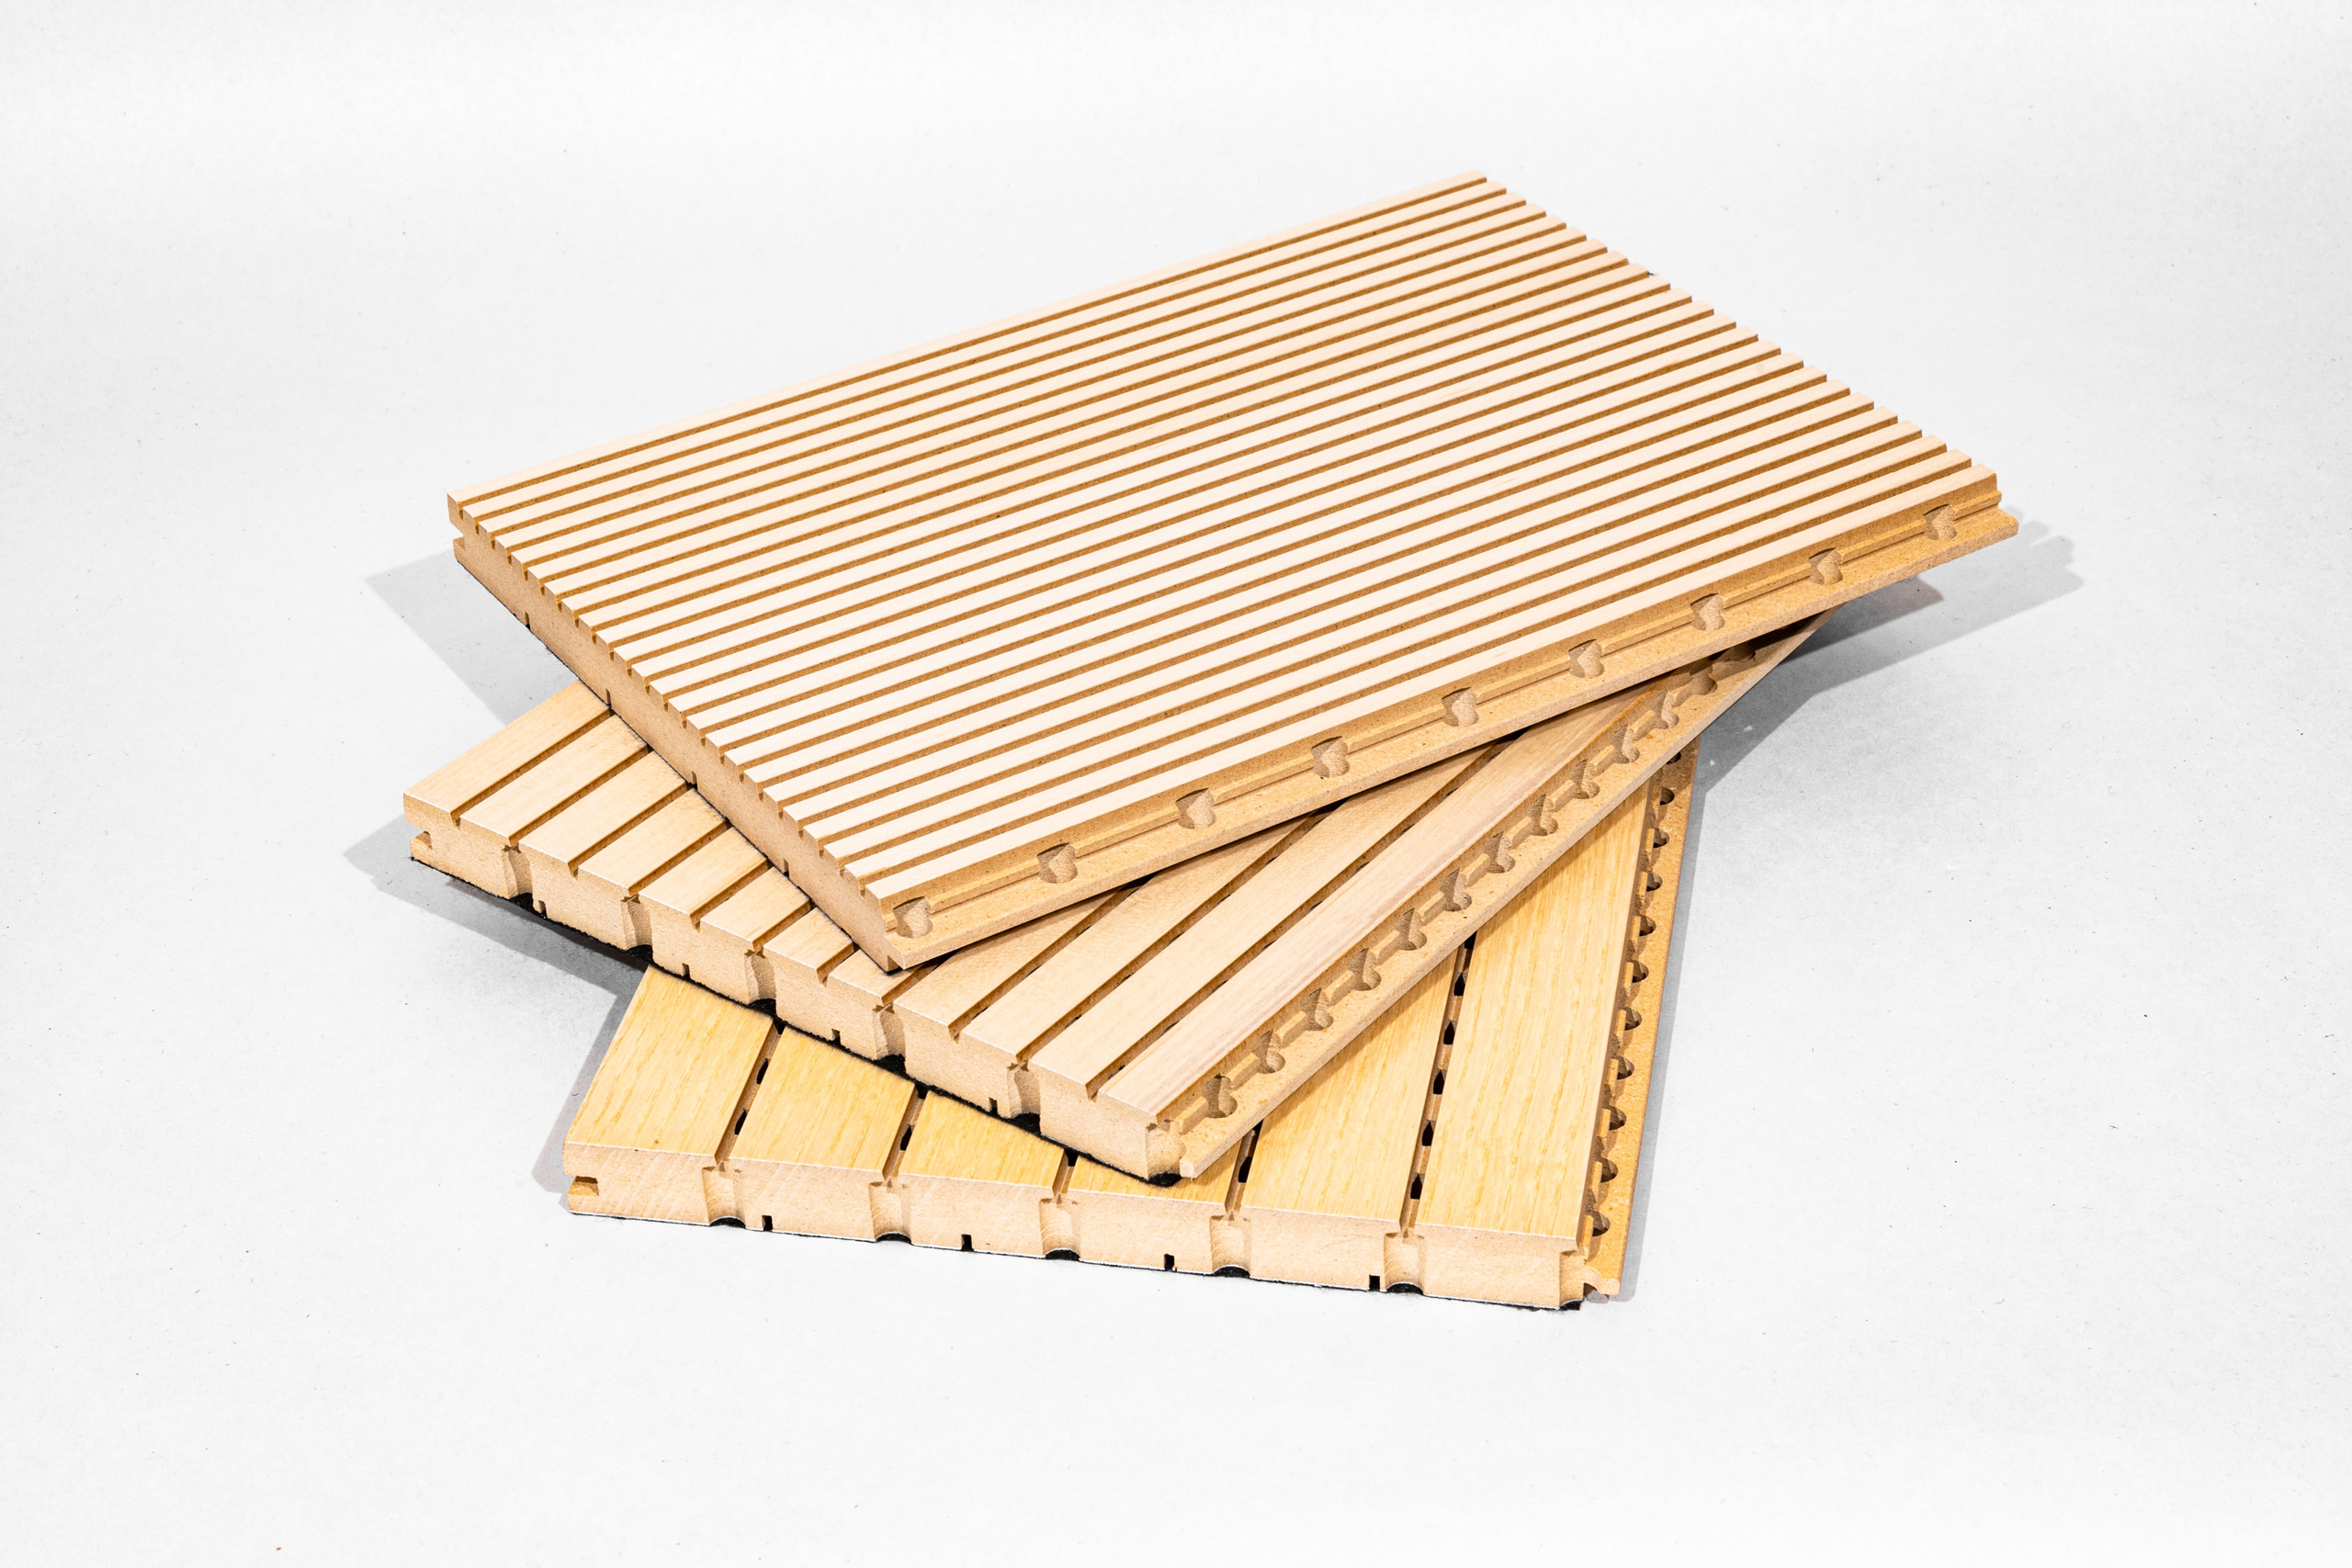 Example of an acoustical grooved panel and plank